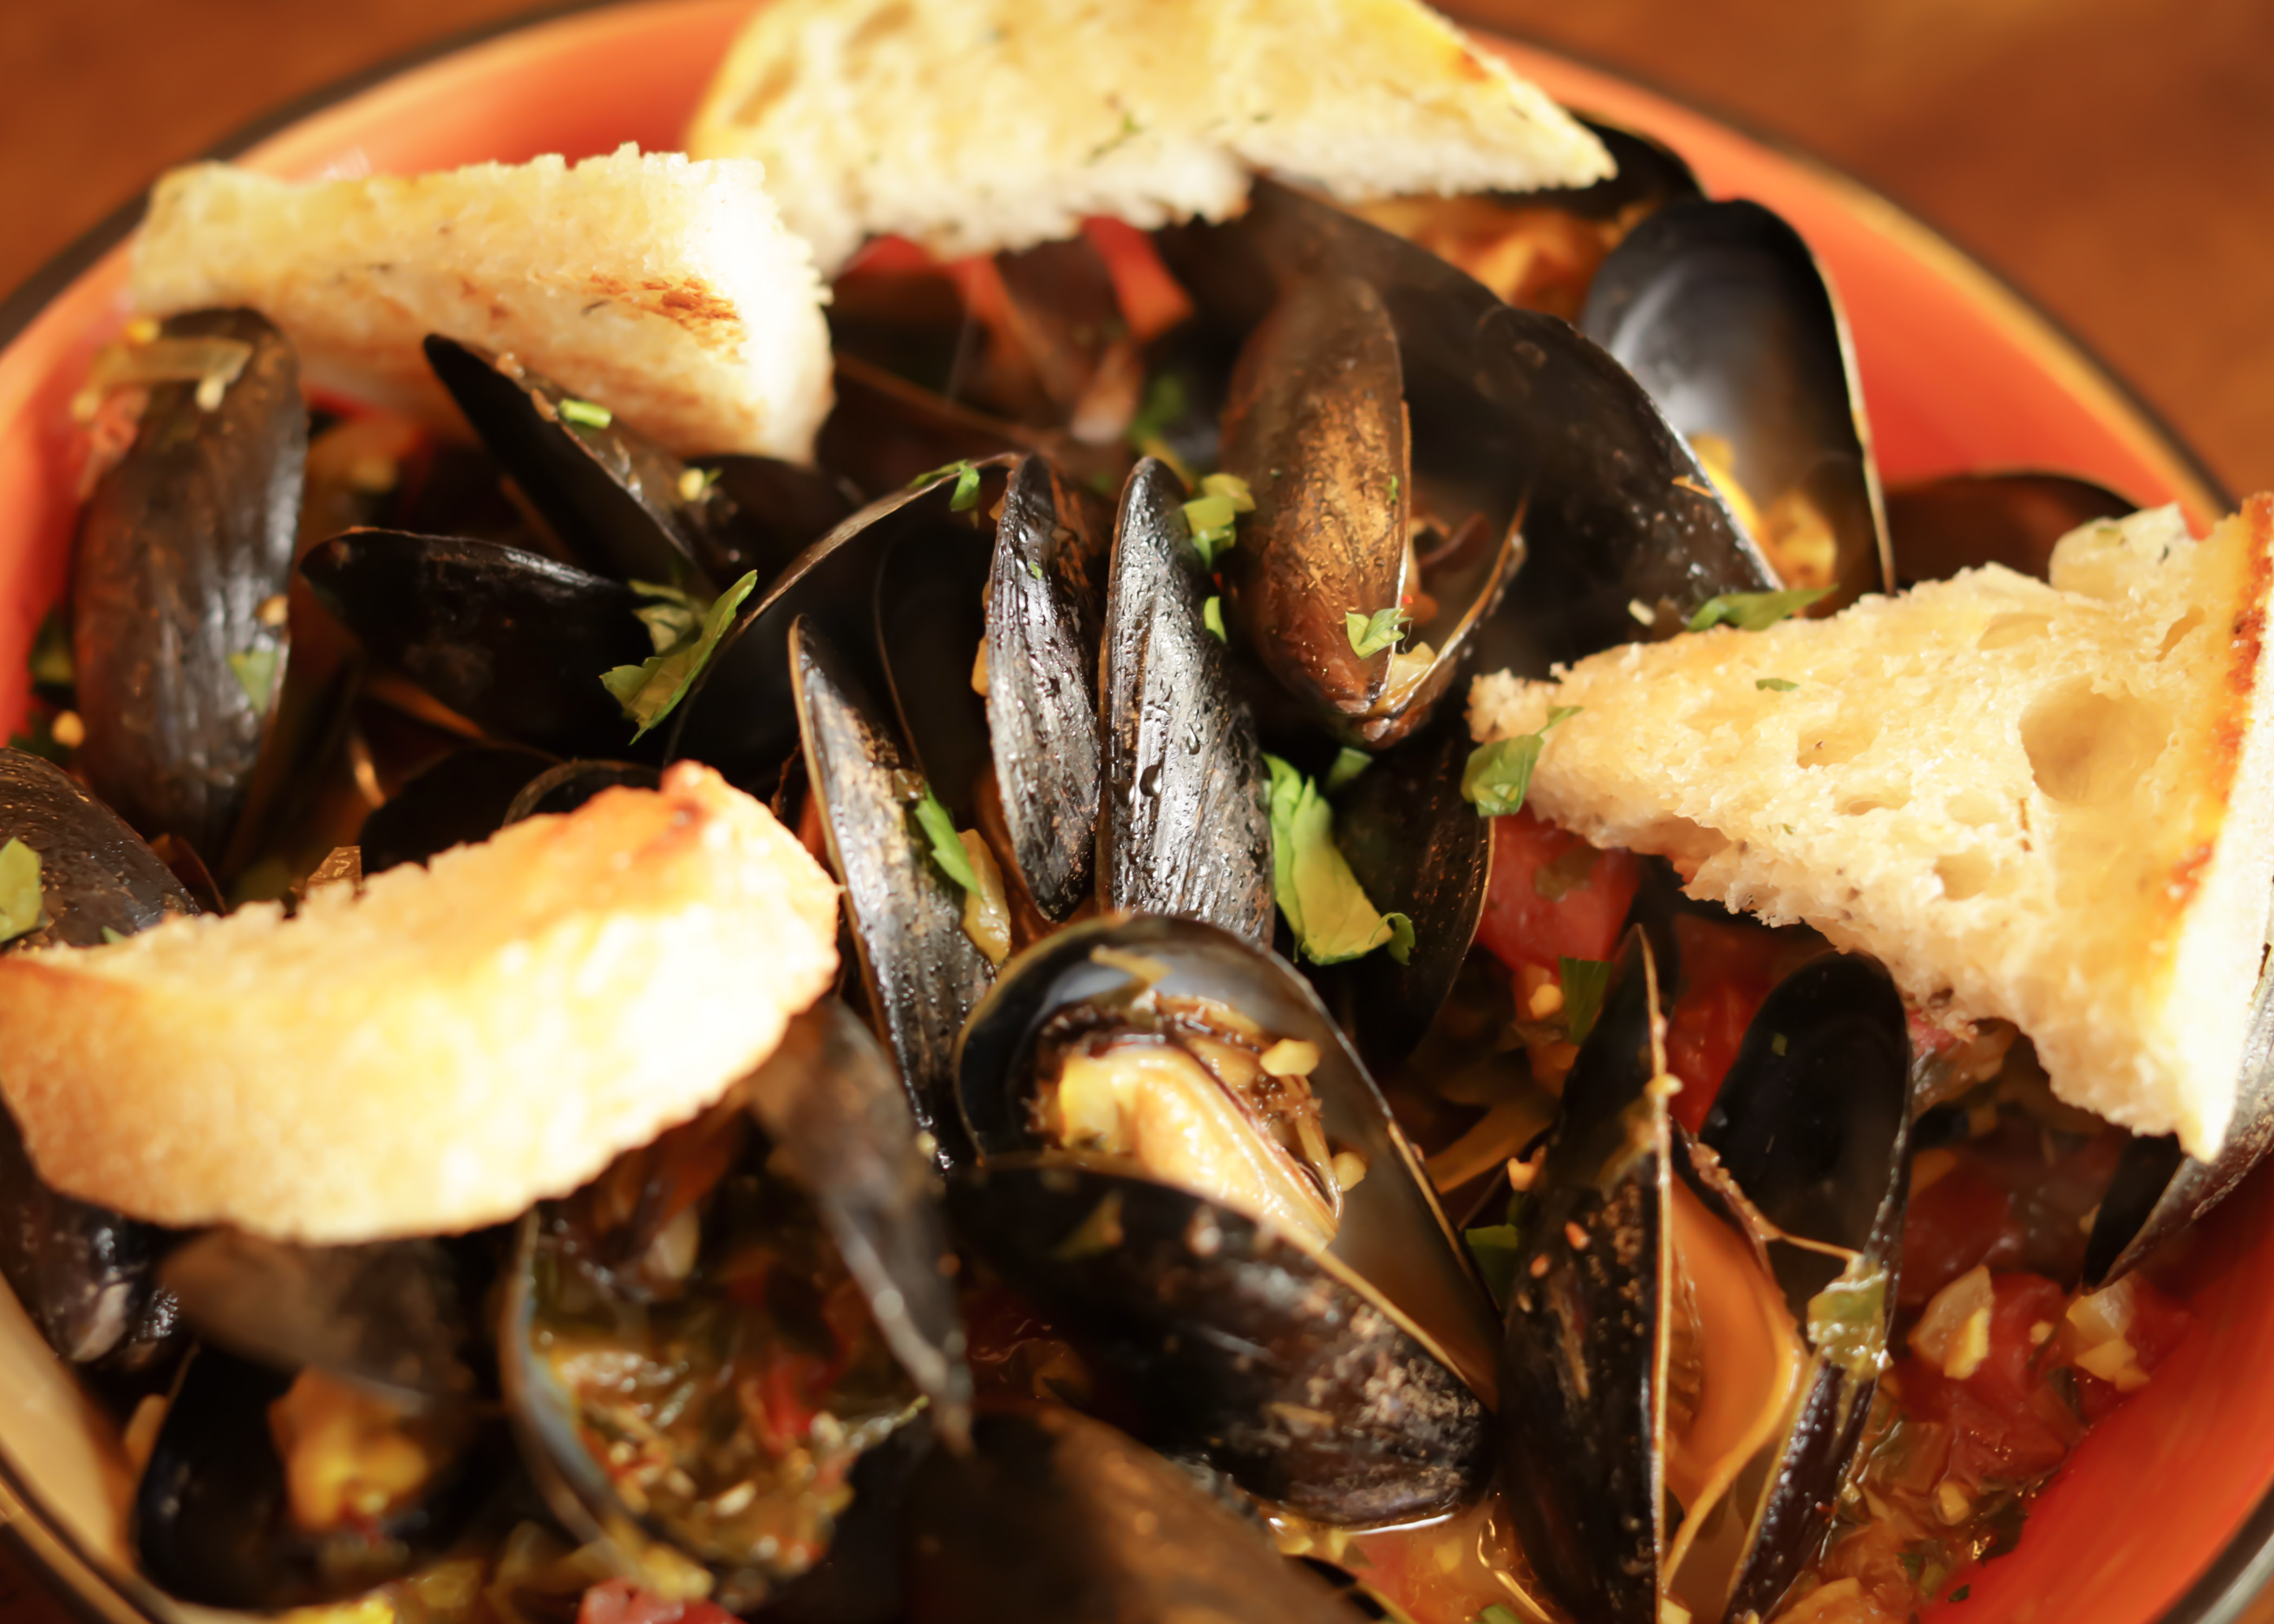 Steamed Mussels in Wine Sauce